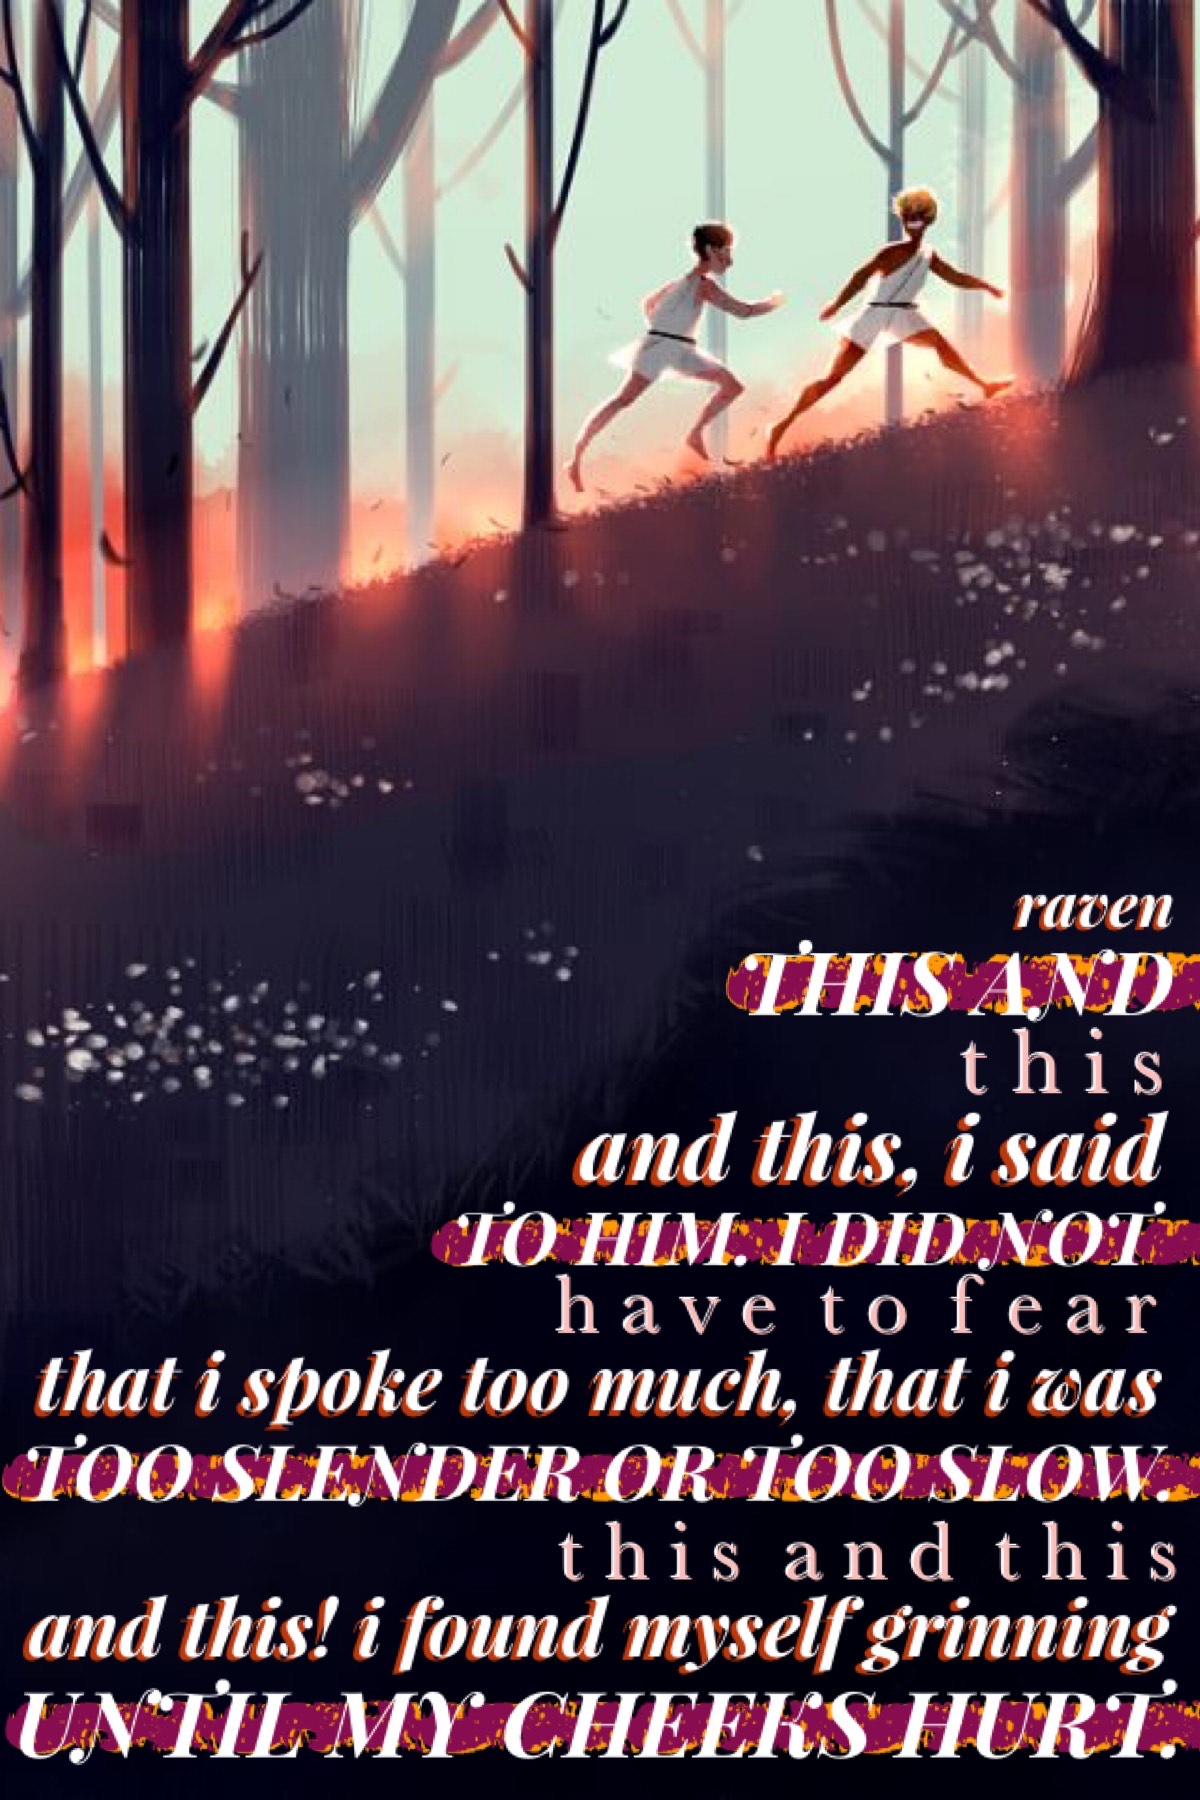 “this, i say. this and this. so many moments of happiness, crowding forward.”
this line makes me curl up in a ball and cry so um
patroclus is a precious baby and must be protected at all costs
comments 🥺